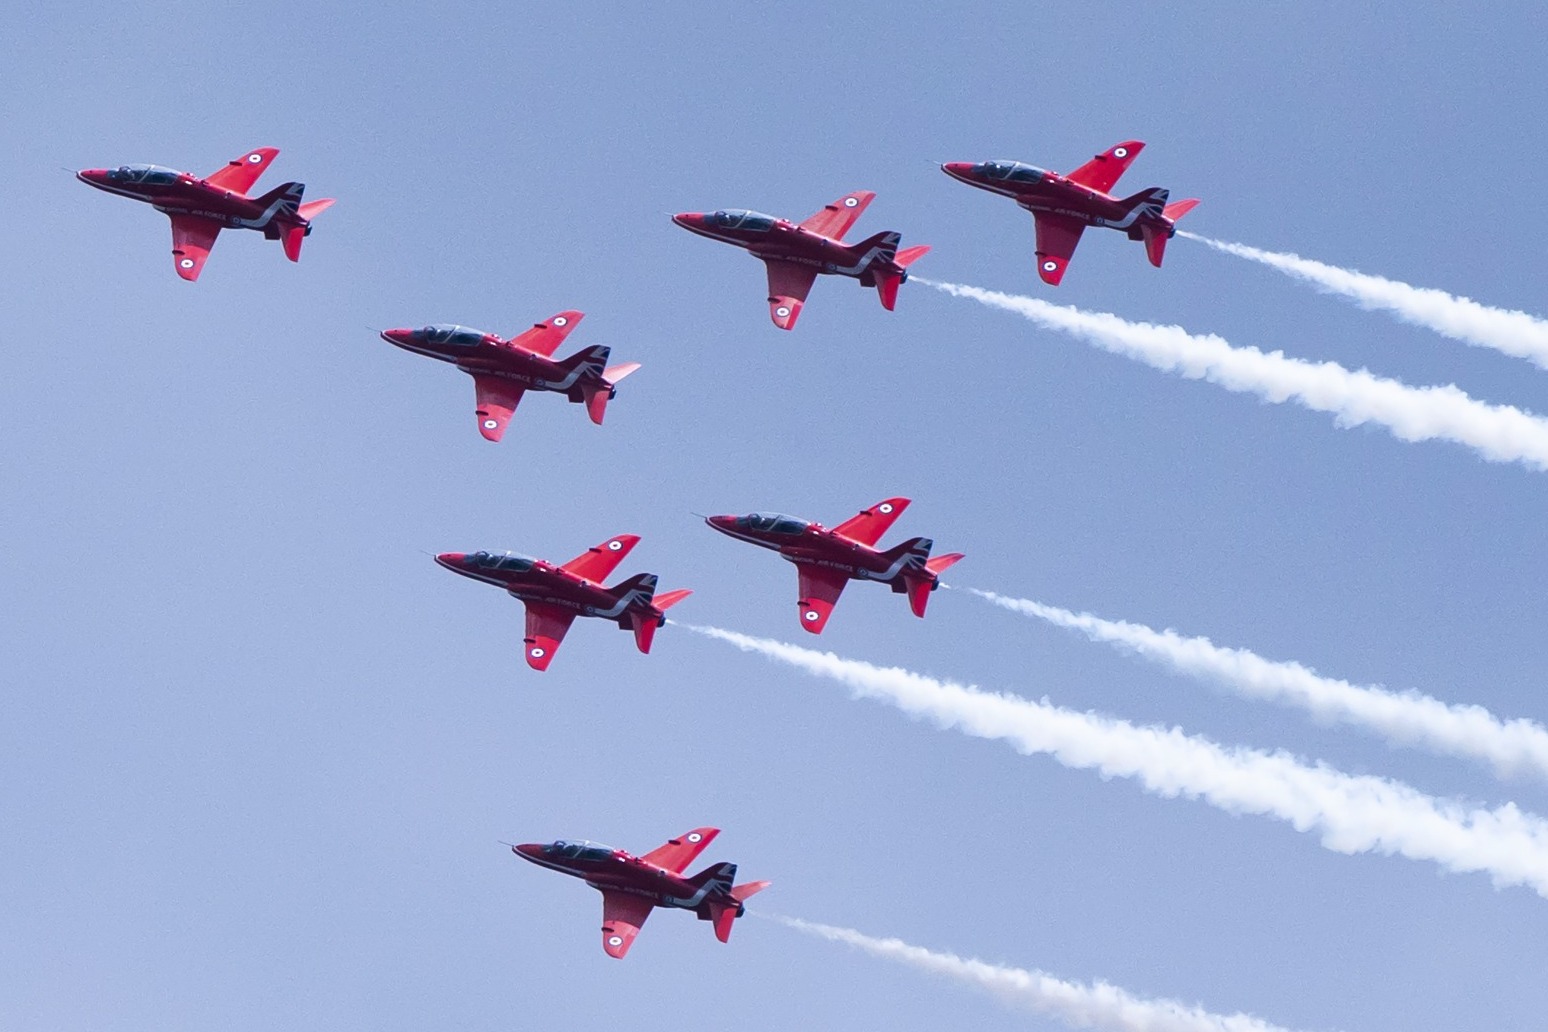 Red Arrows members accused of bullying, misogyny and sexual harassment 